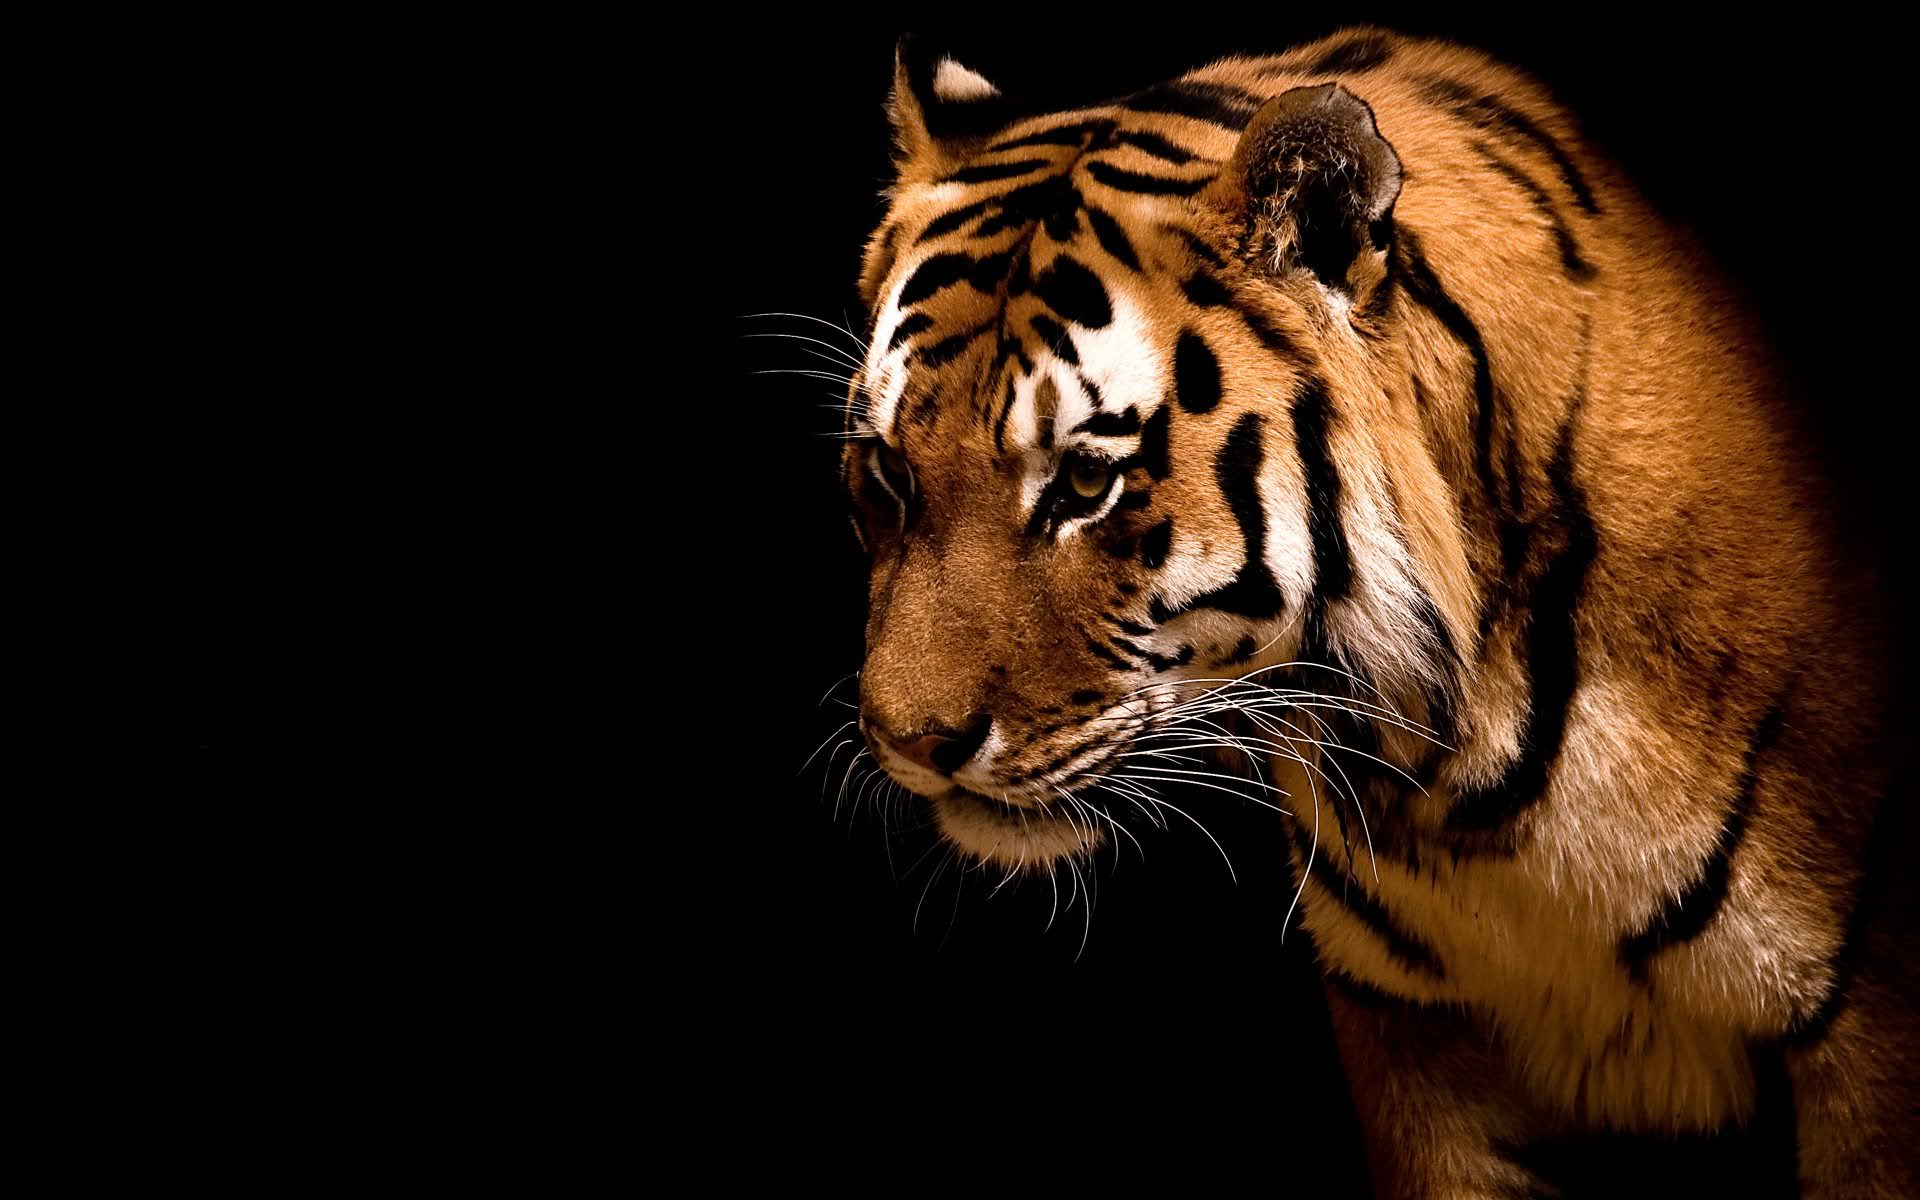 Tiger Picture Download